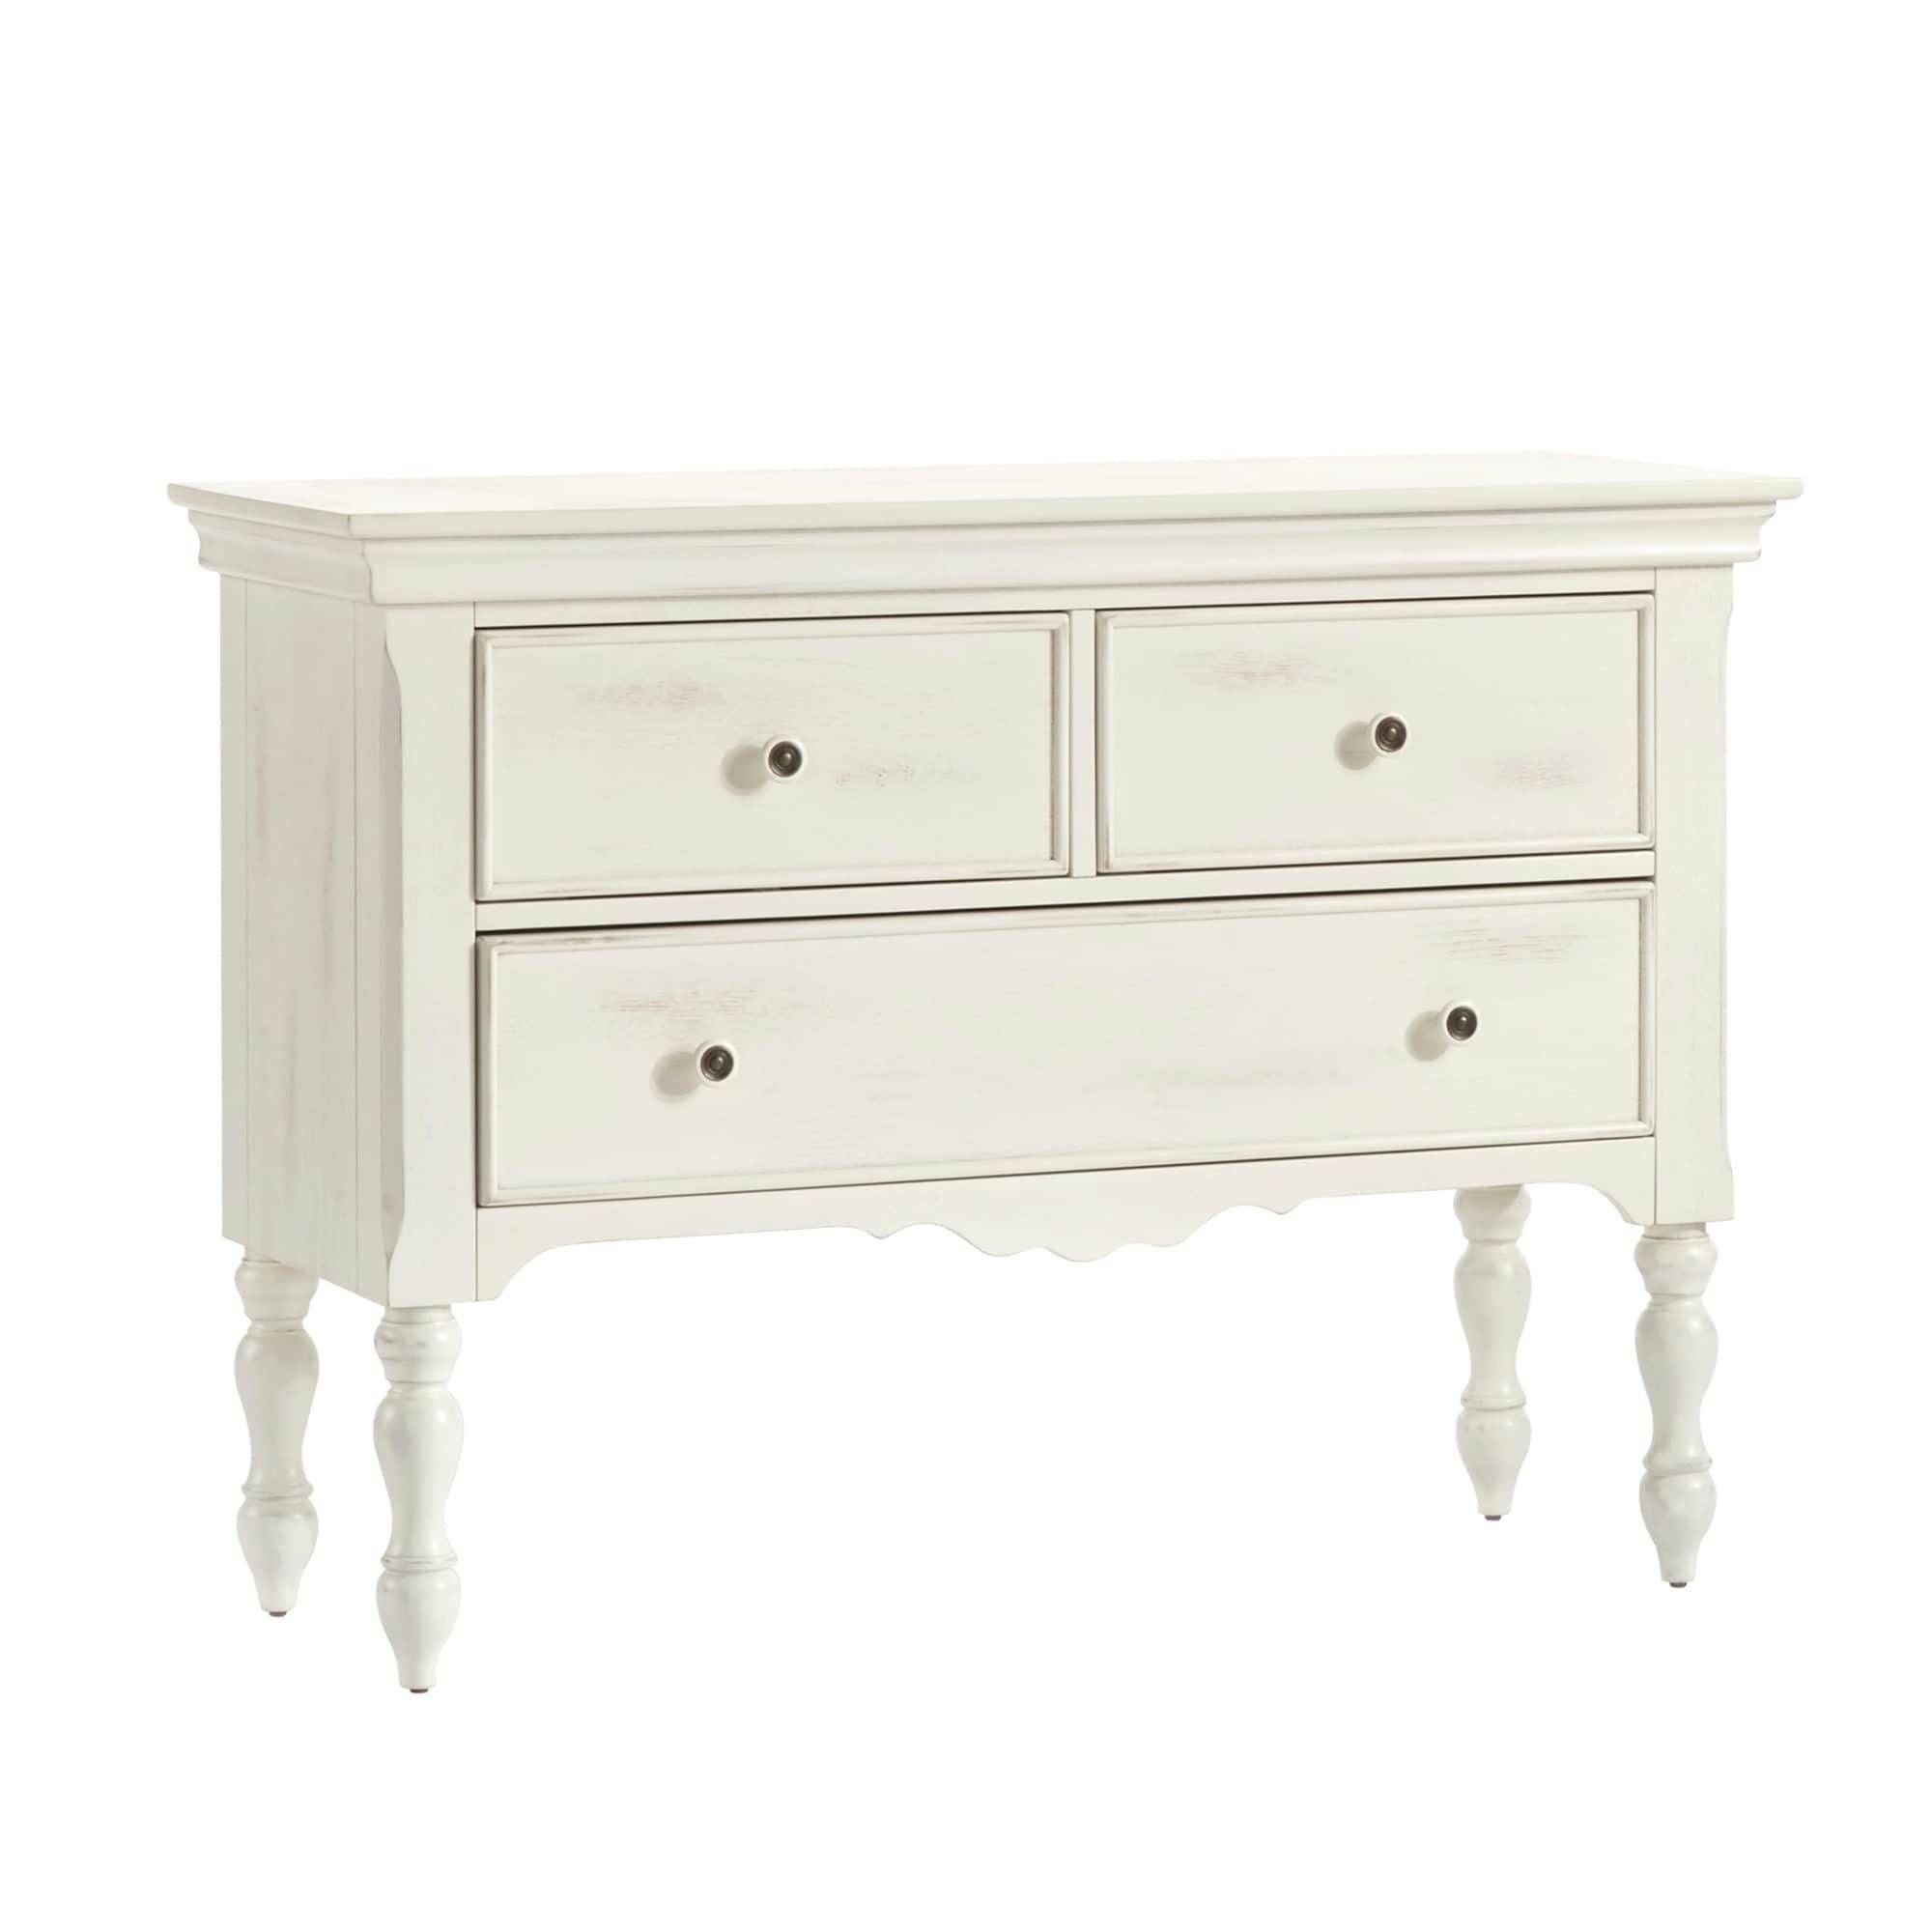 Mckay Country Antique White Buffet Storage Serverinspire Q Throughout Best And Newest Antique White Sideboards (Photo 7 of 15)